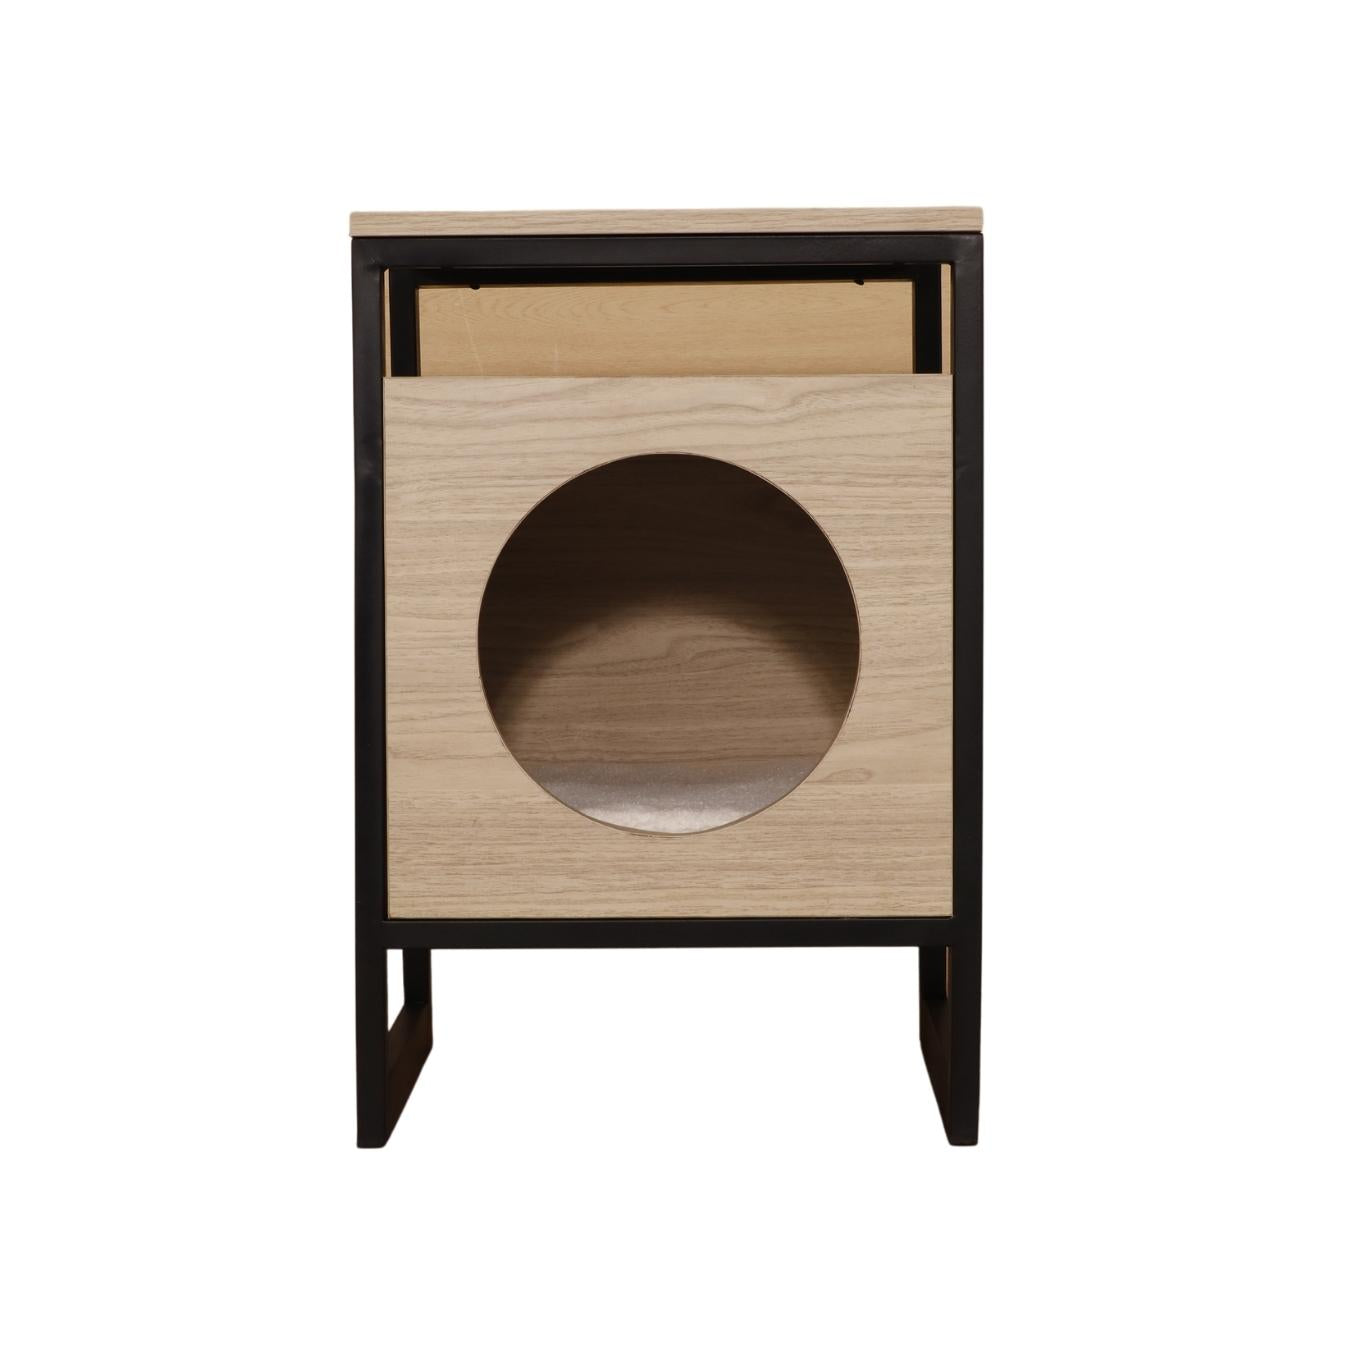 Mr. Chuck - MOJO Cat Box Side Table AF Home